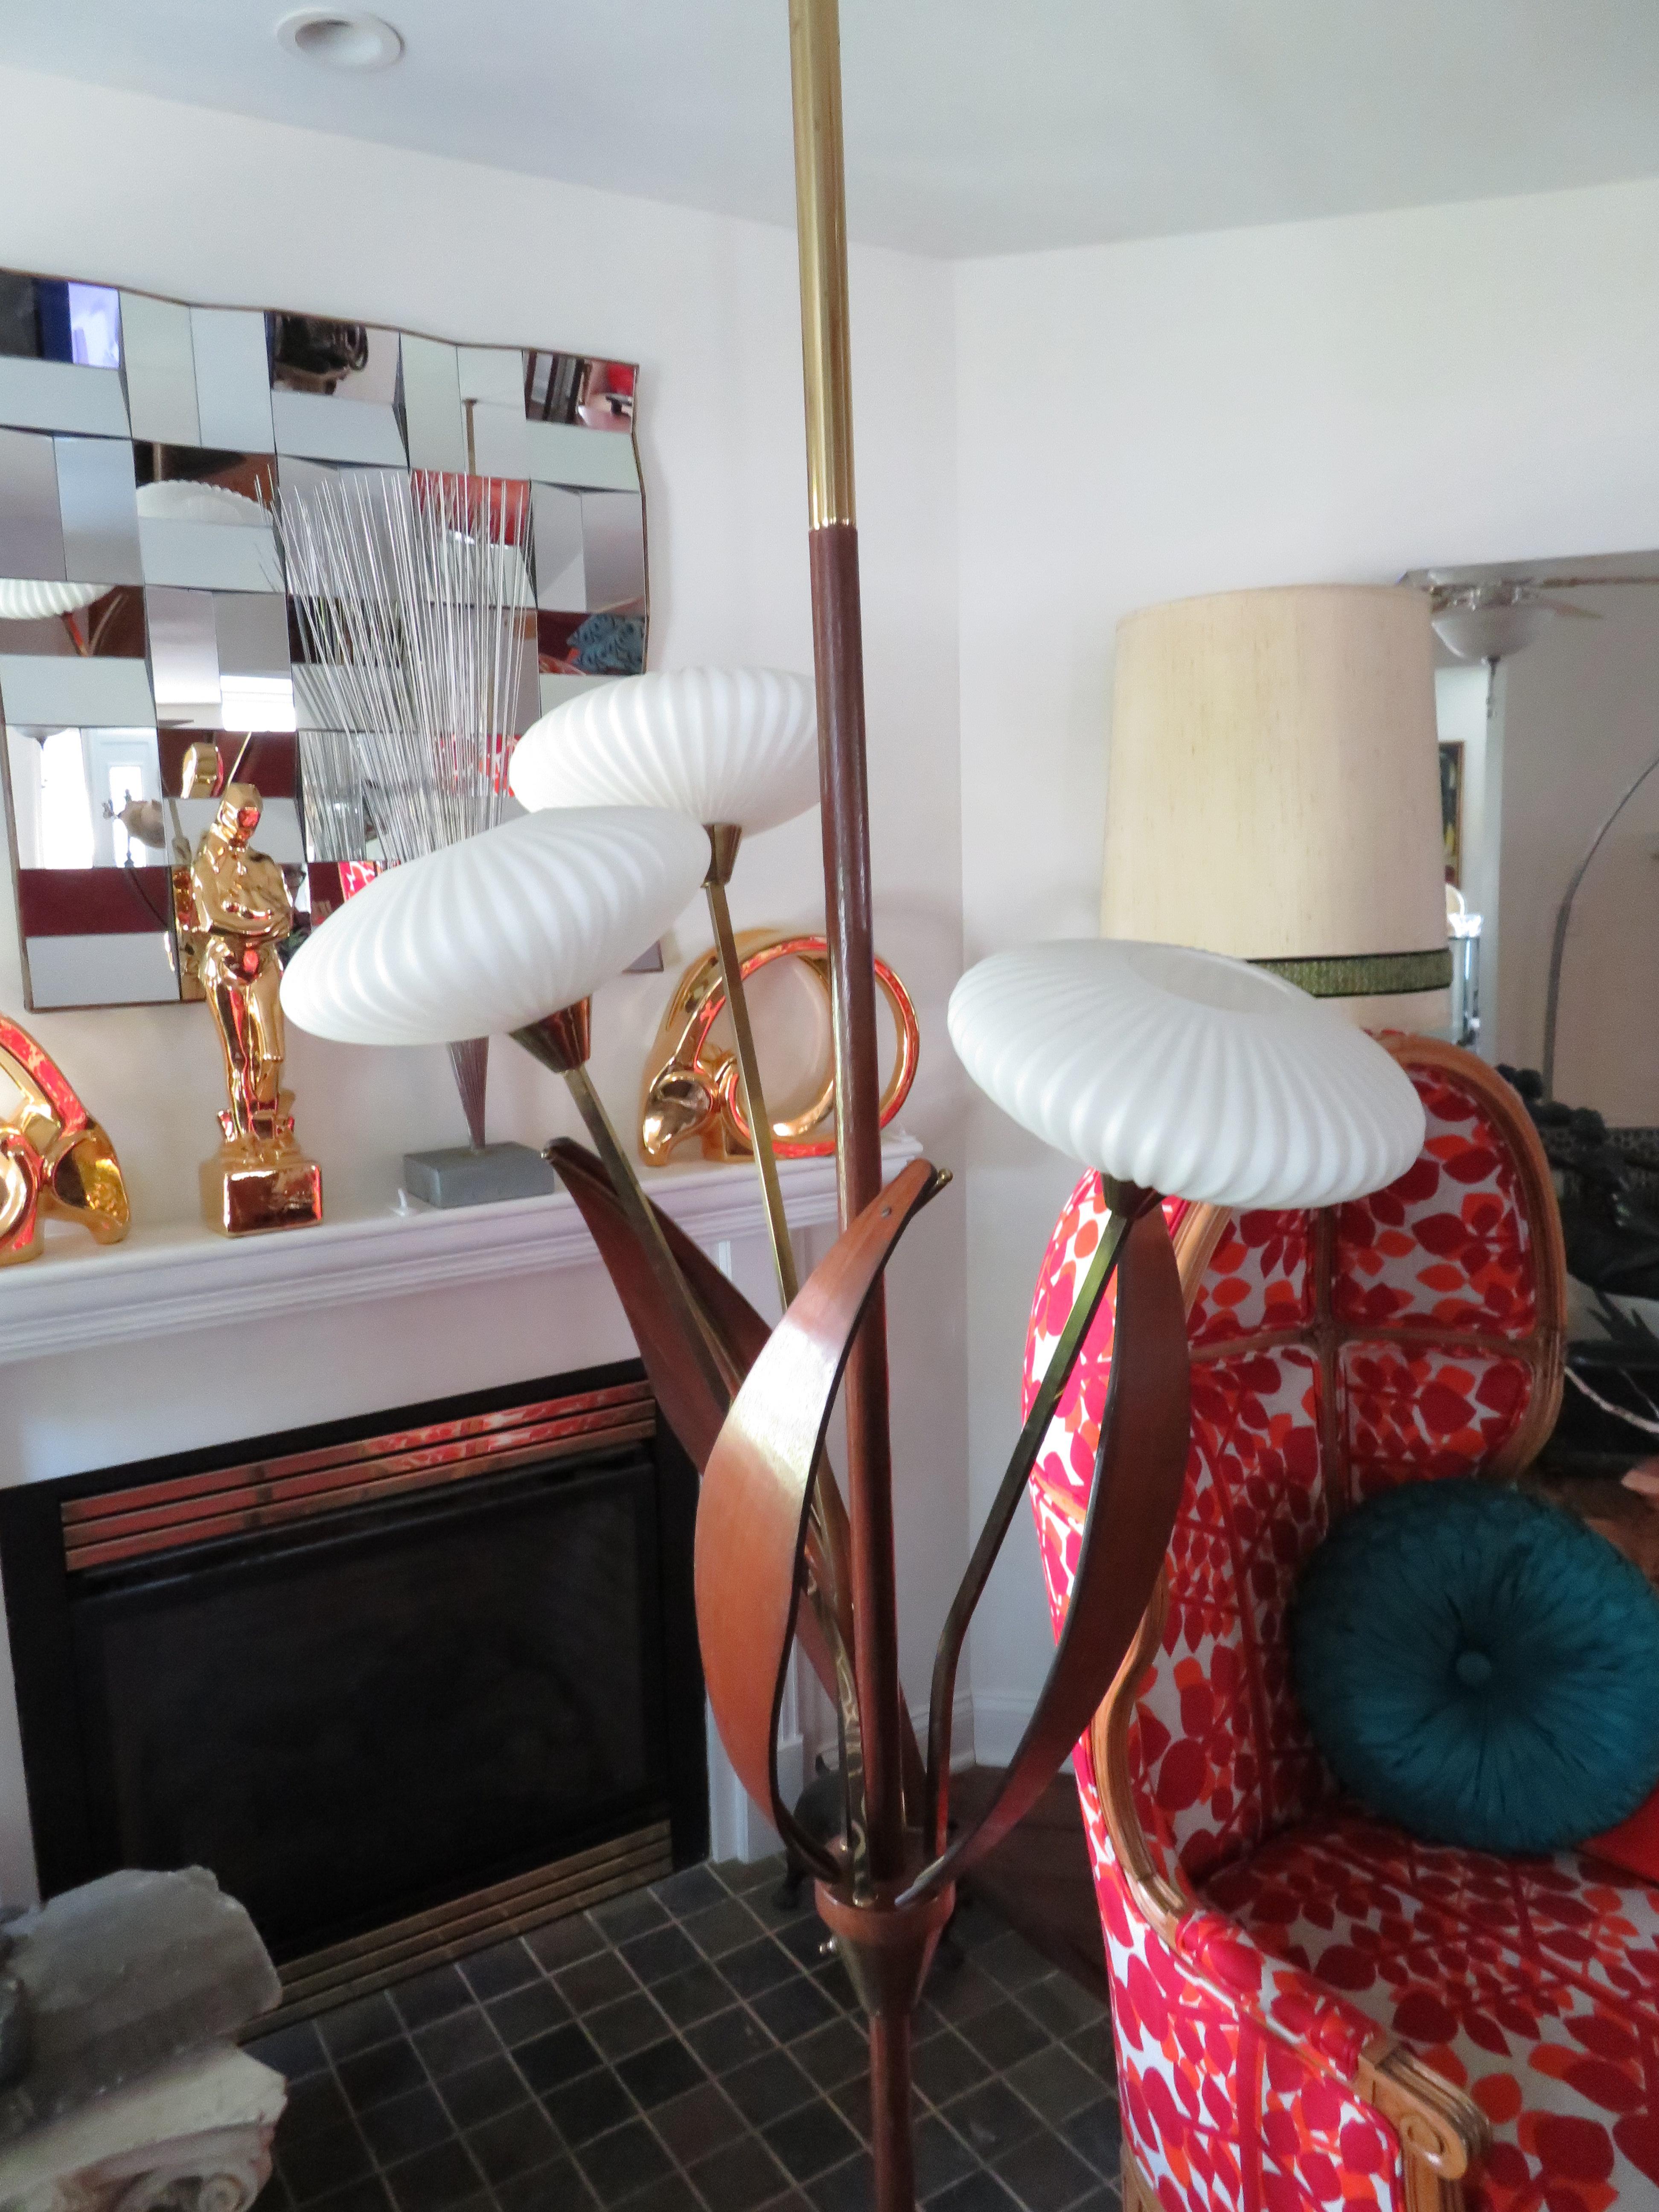 Fantastic brass, walnut and glass flying saucer style tension pole lamp. This piece is in very nice vintage condition with all the original ribbed globes-only some minor wear to the pole. Its three lamps can be lit in sequence, one, two or all